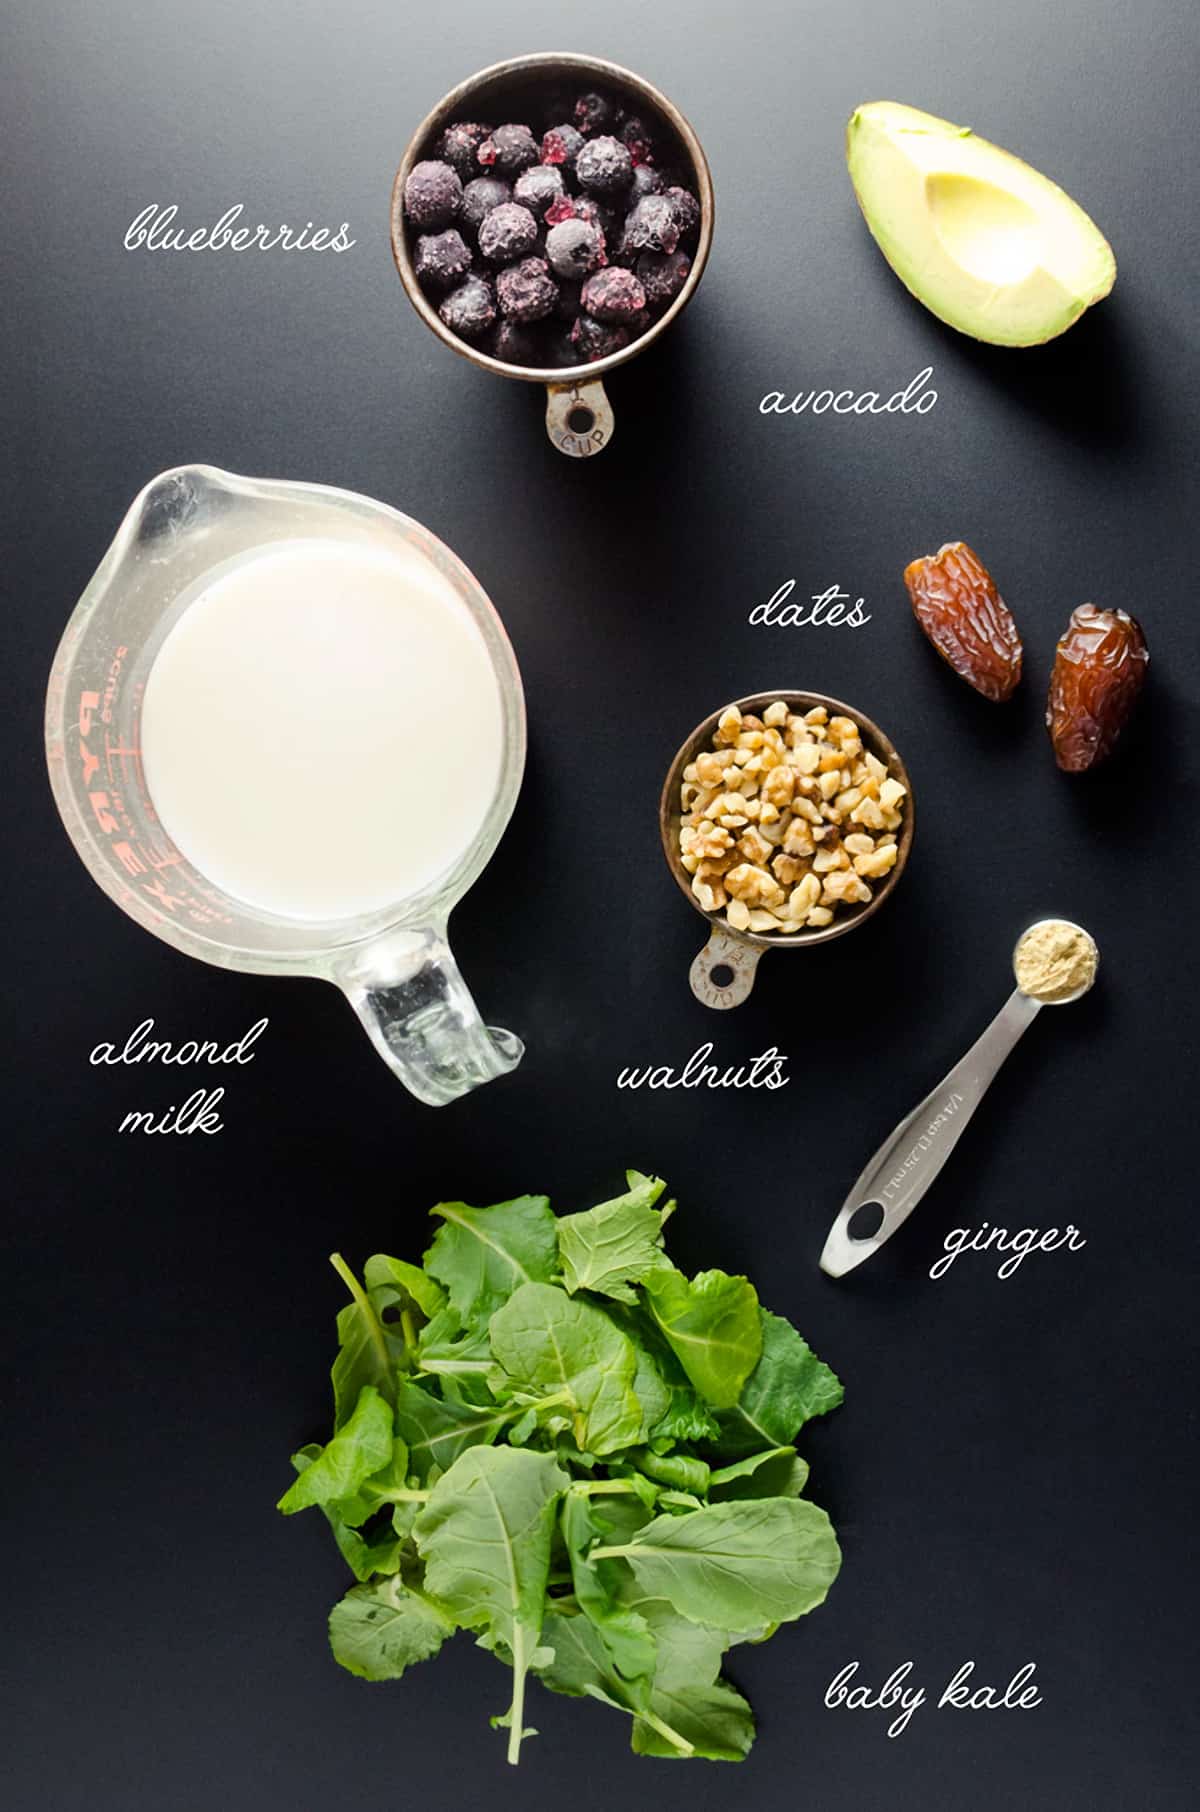 Overhead view of super smoothie ingredients, including blueberries, avocado, dates, walnuts, ginger, baby kale, and almond milk